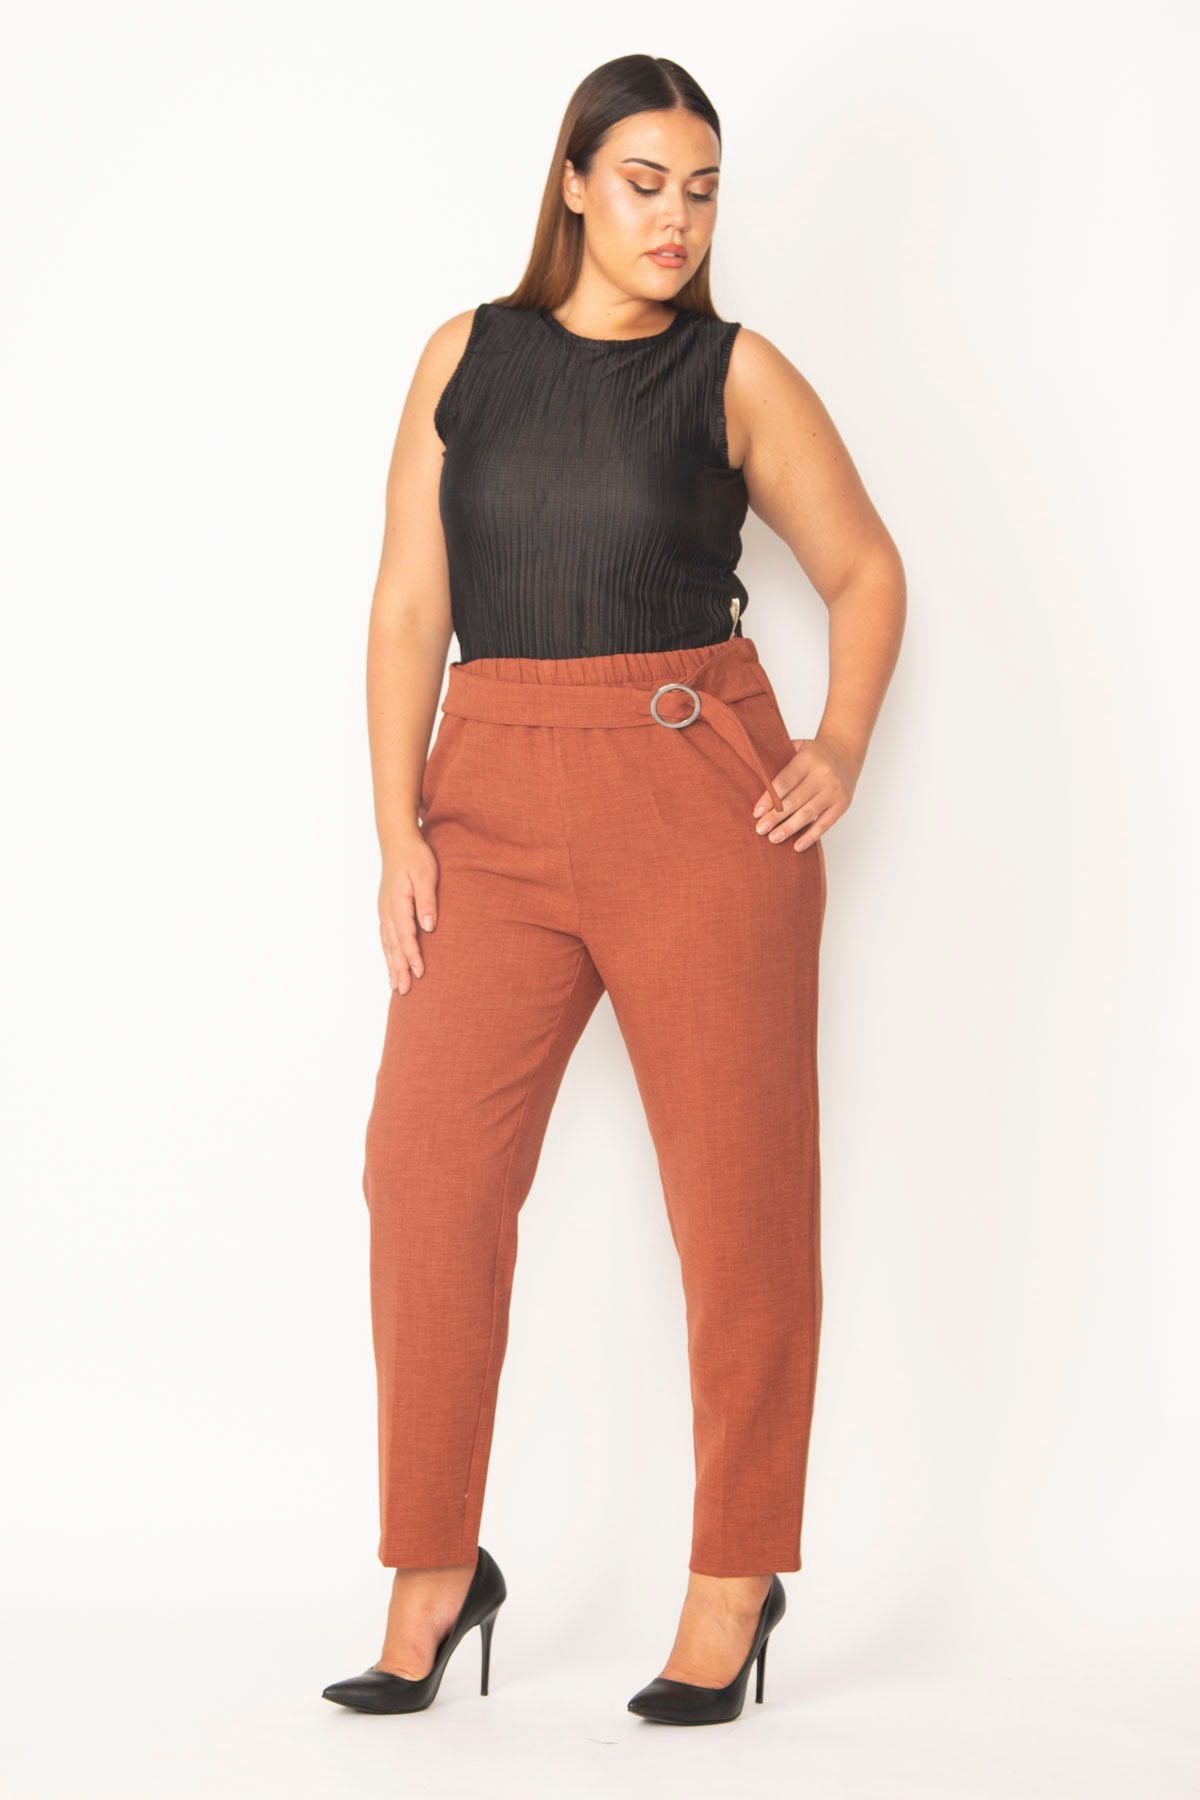 Plus Size Bottoms | Womens Plus Size Clothing | LaLA - Lost and Led Astray